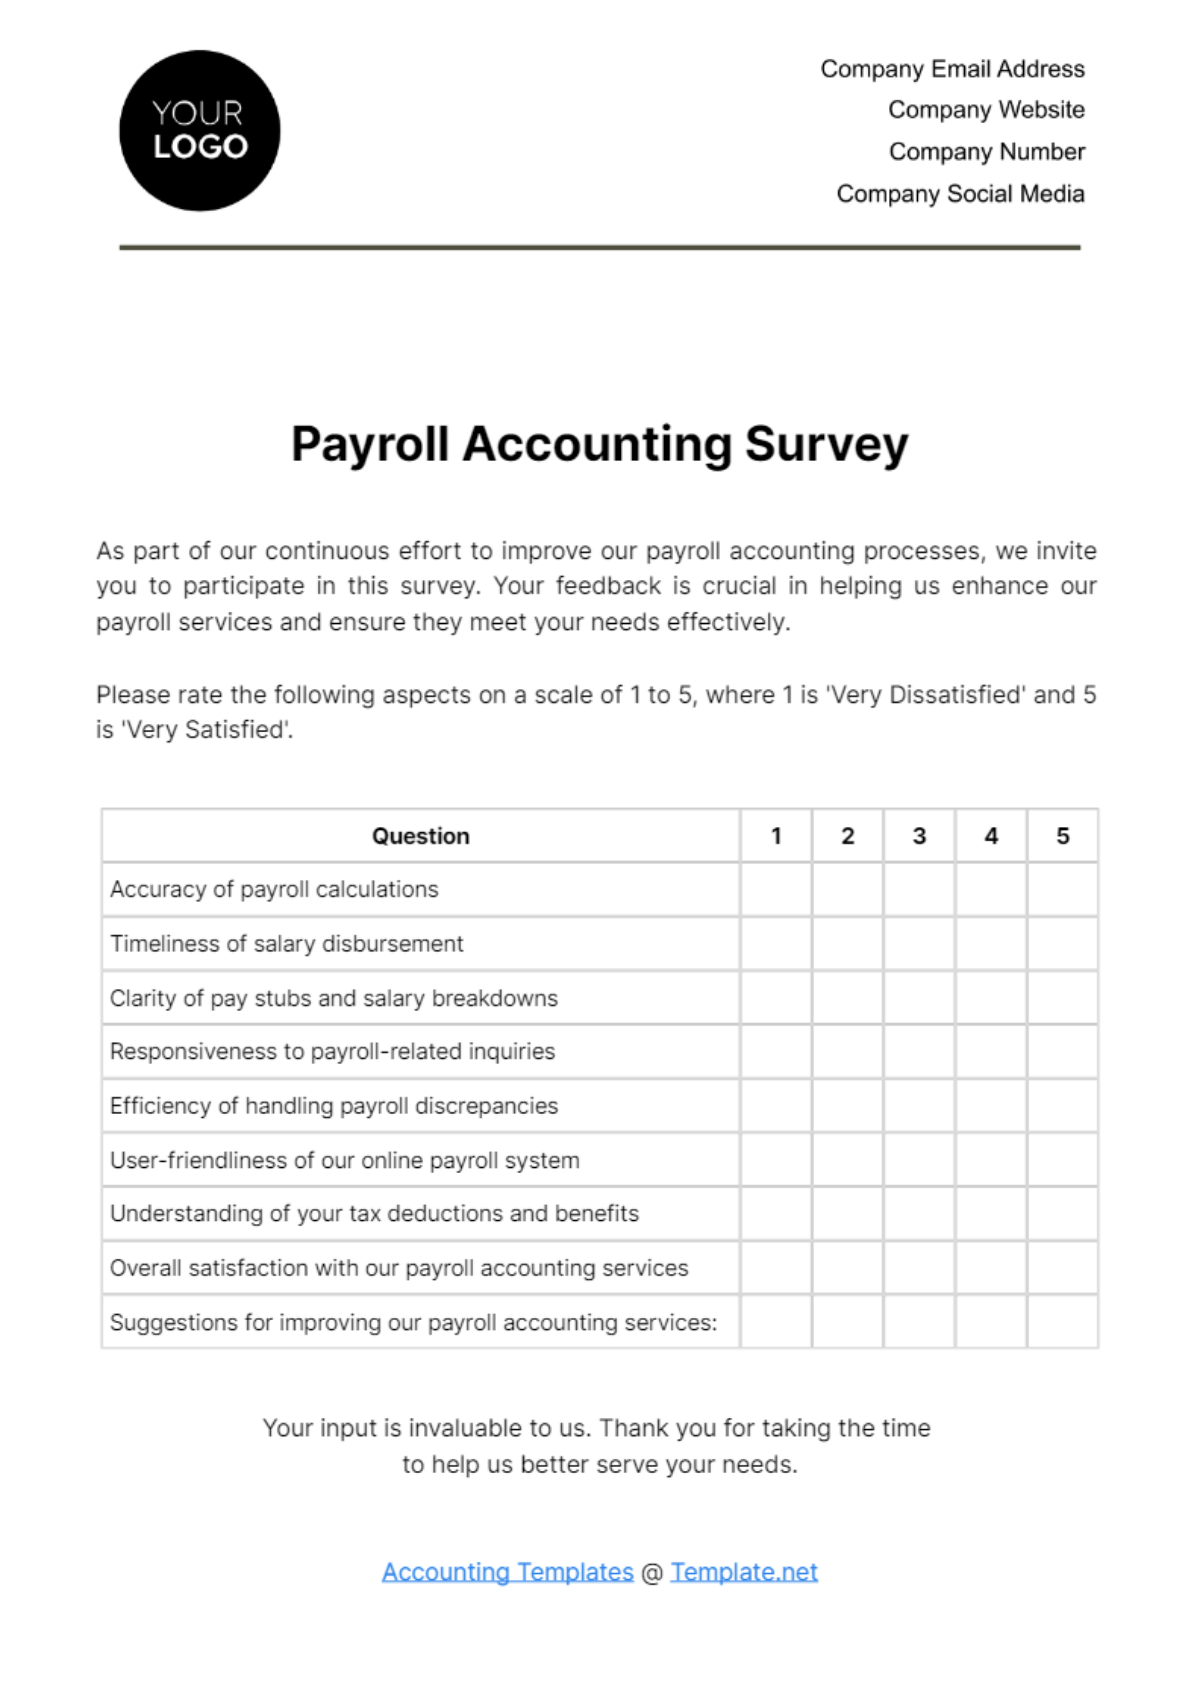 Payroll Accounting Survey Template